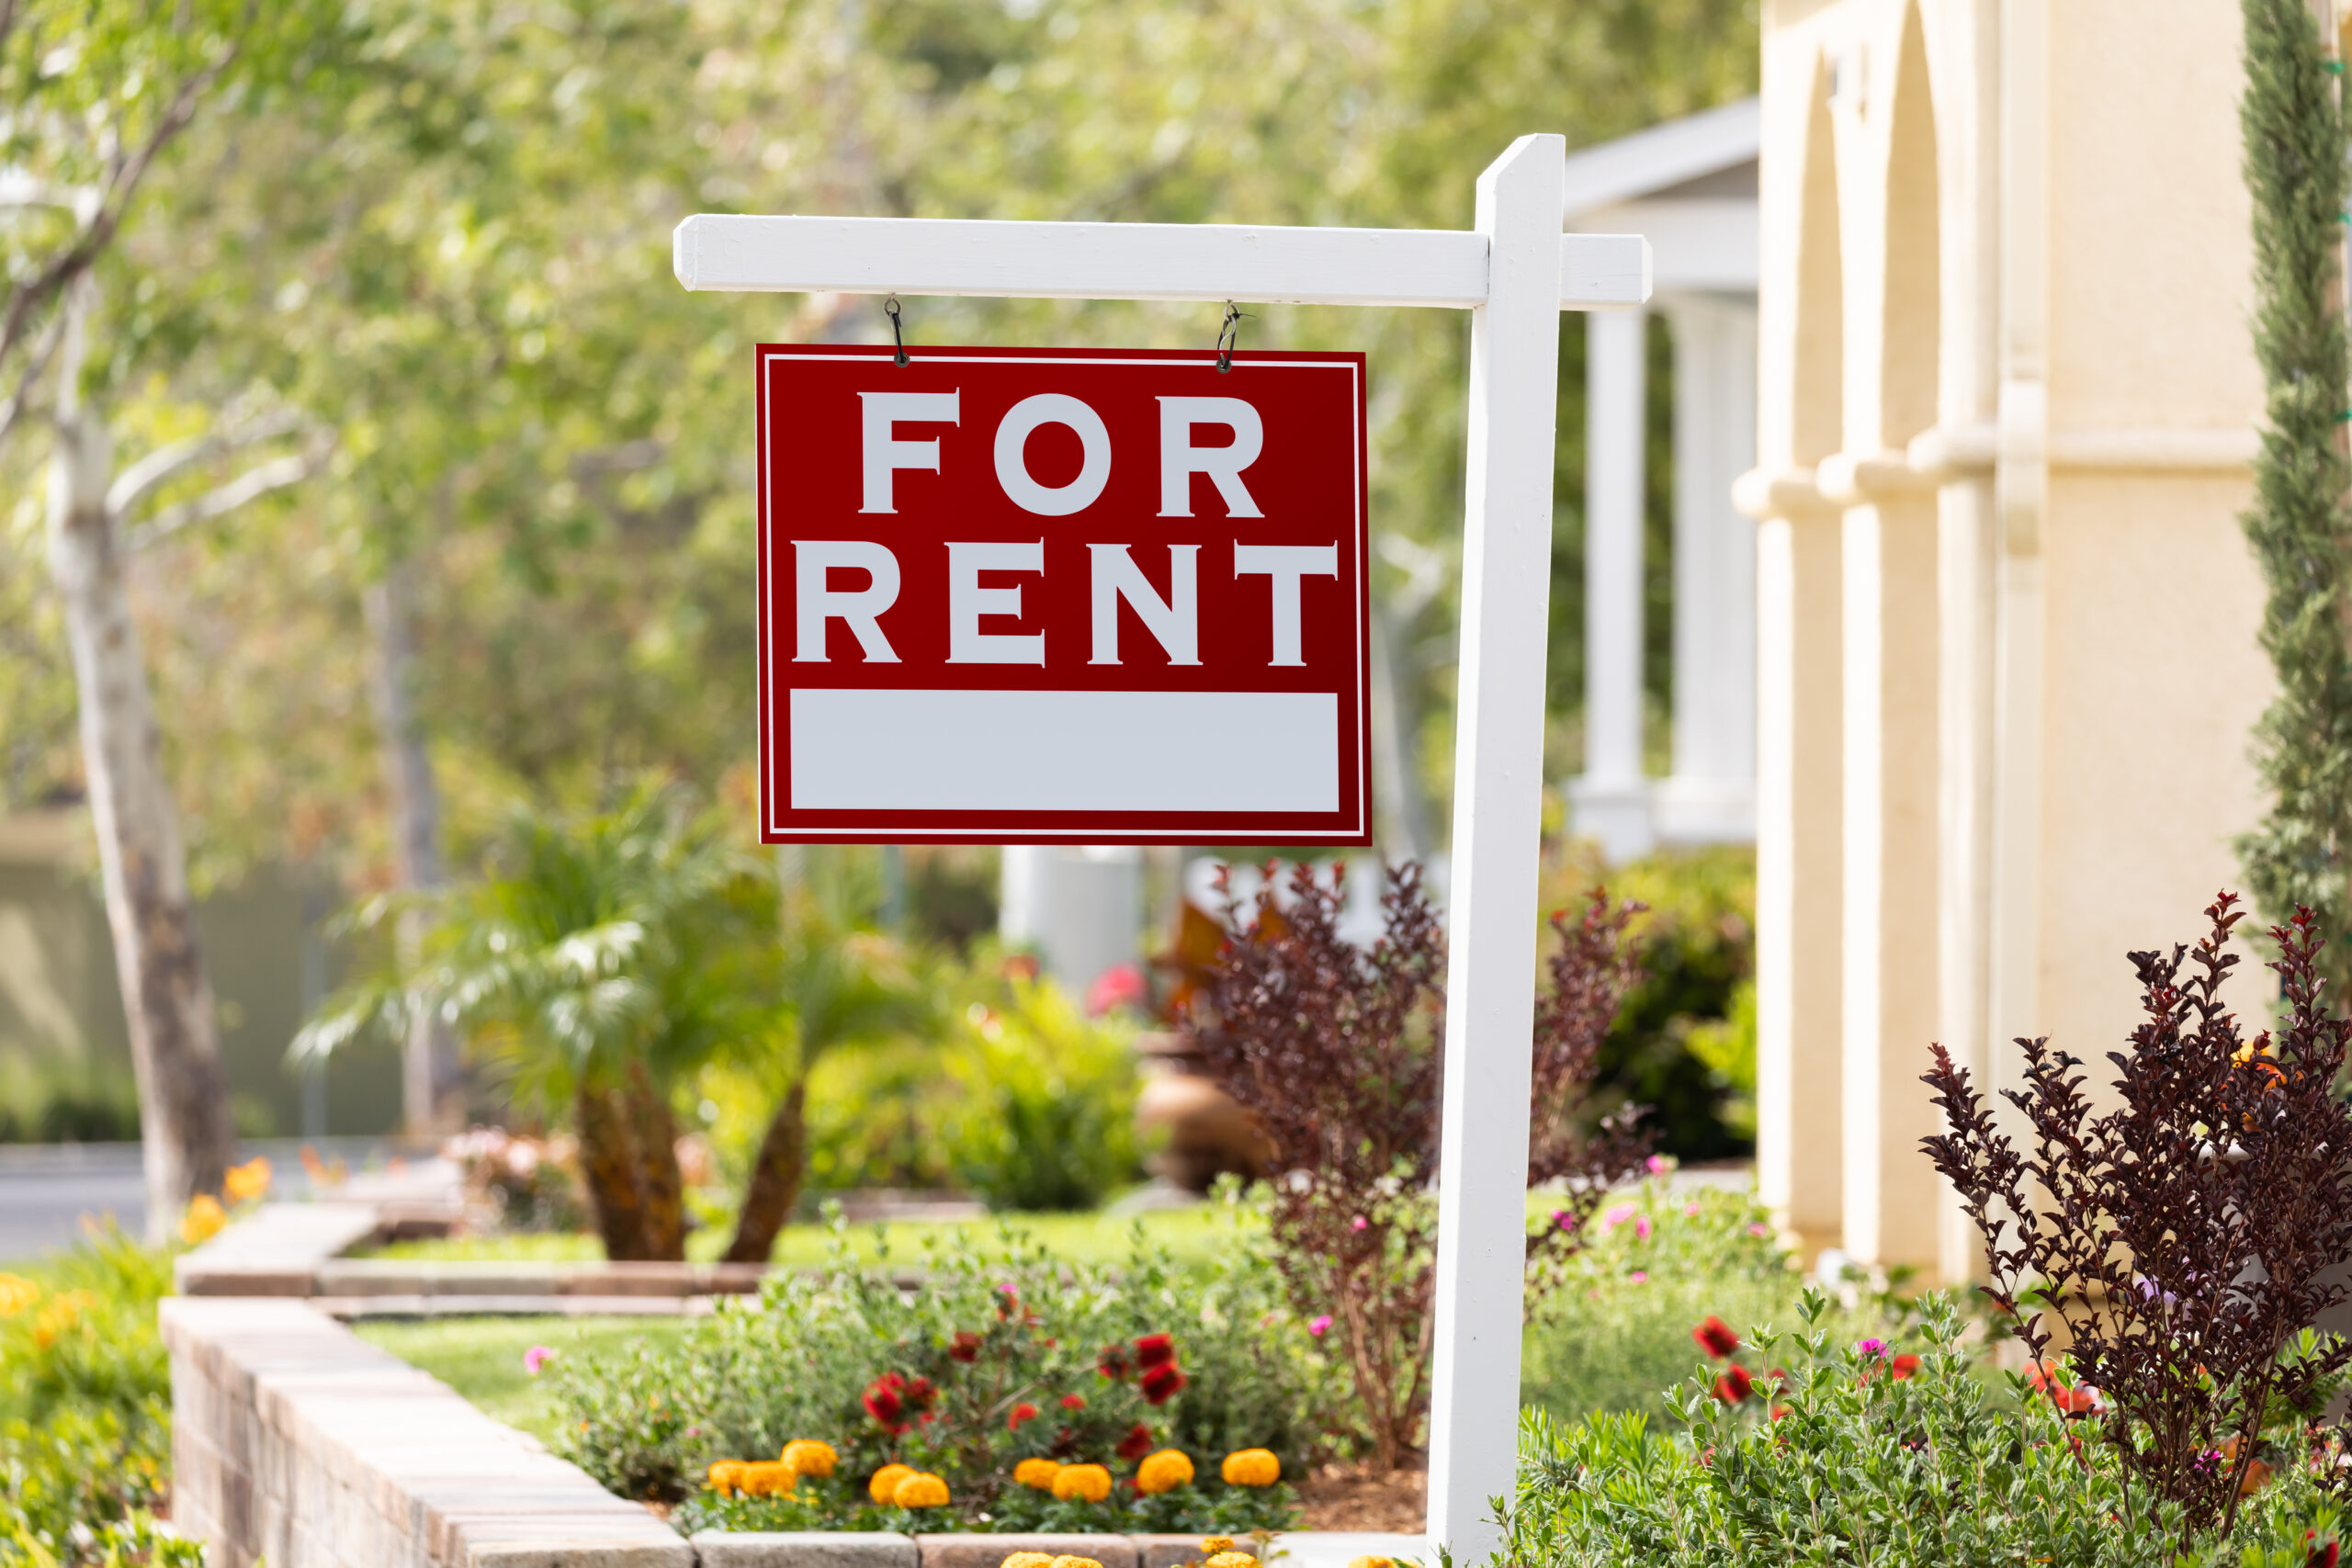 Senate Bill 608: New Regulations Are Changing the Game for Landlords